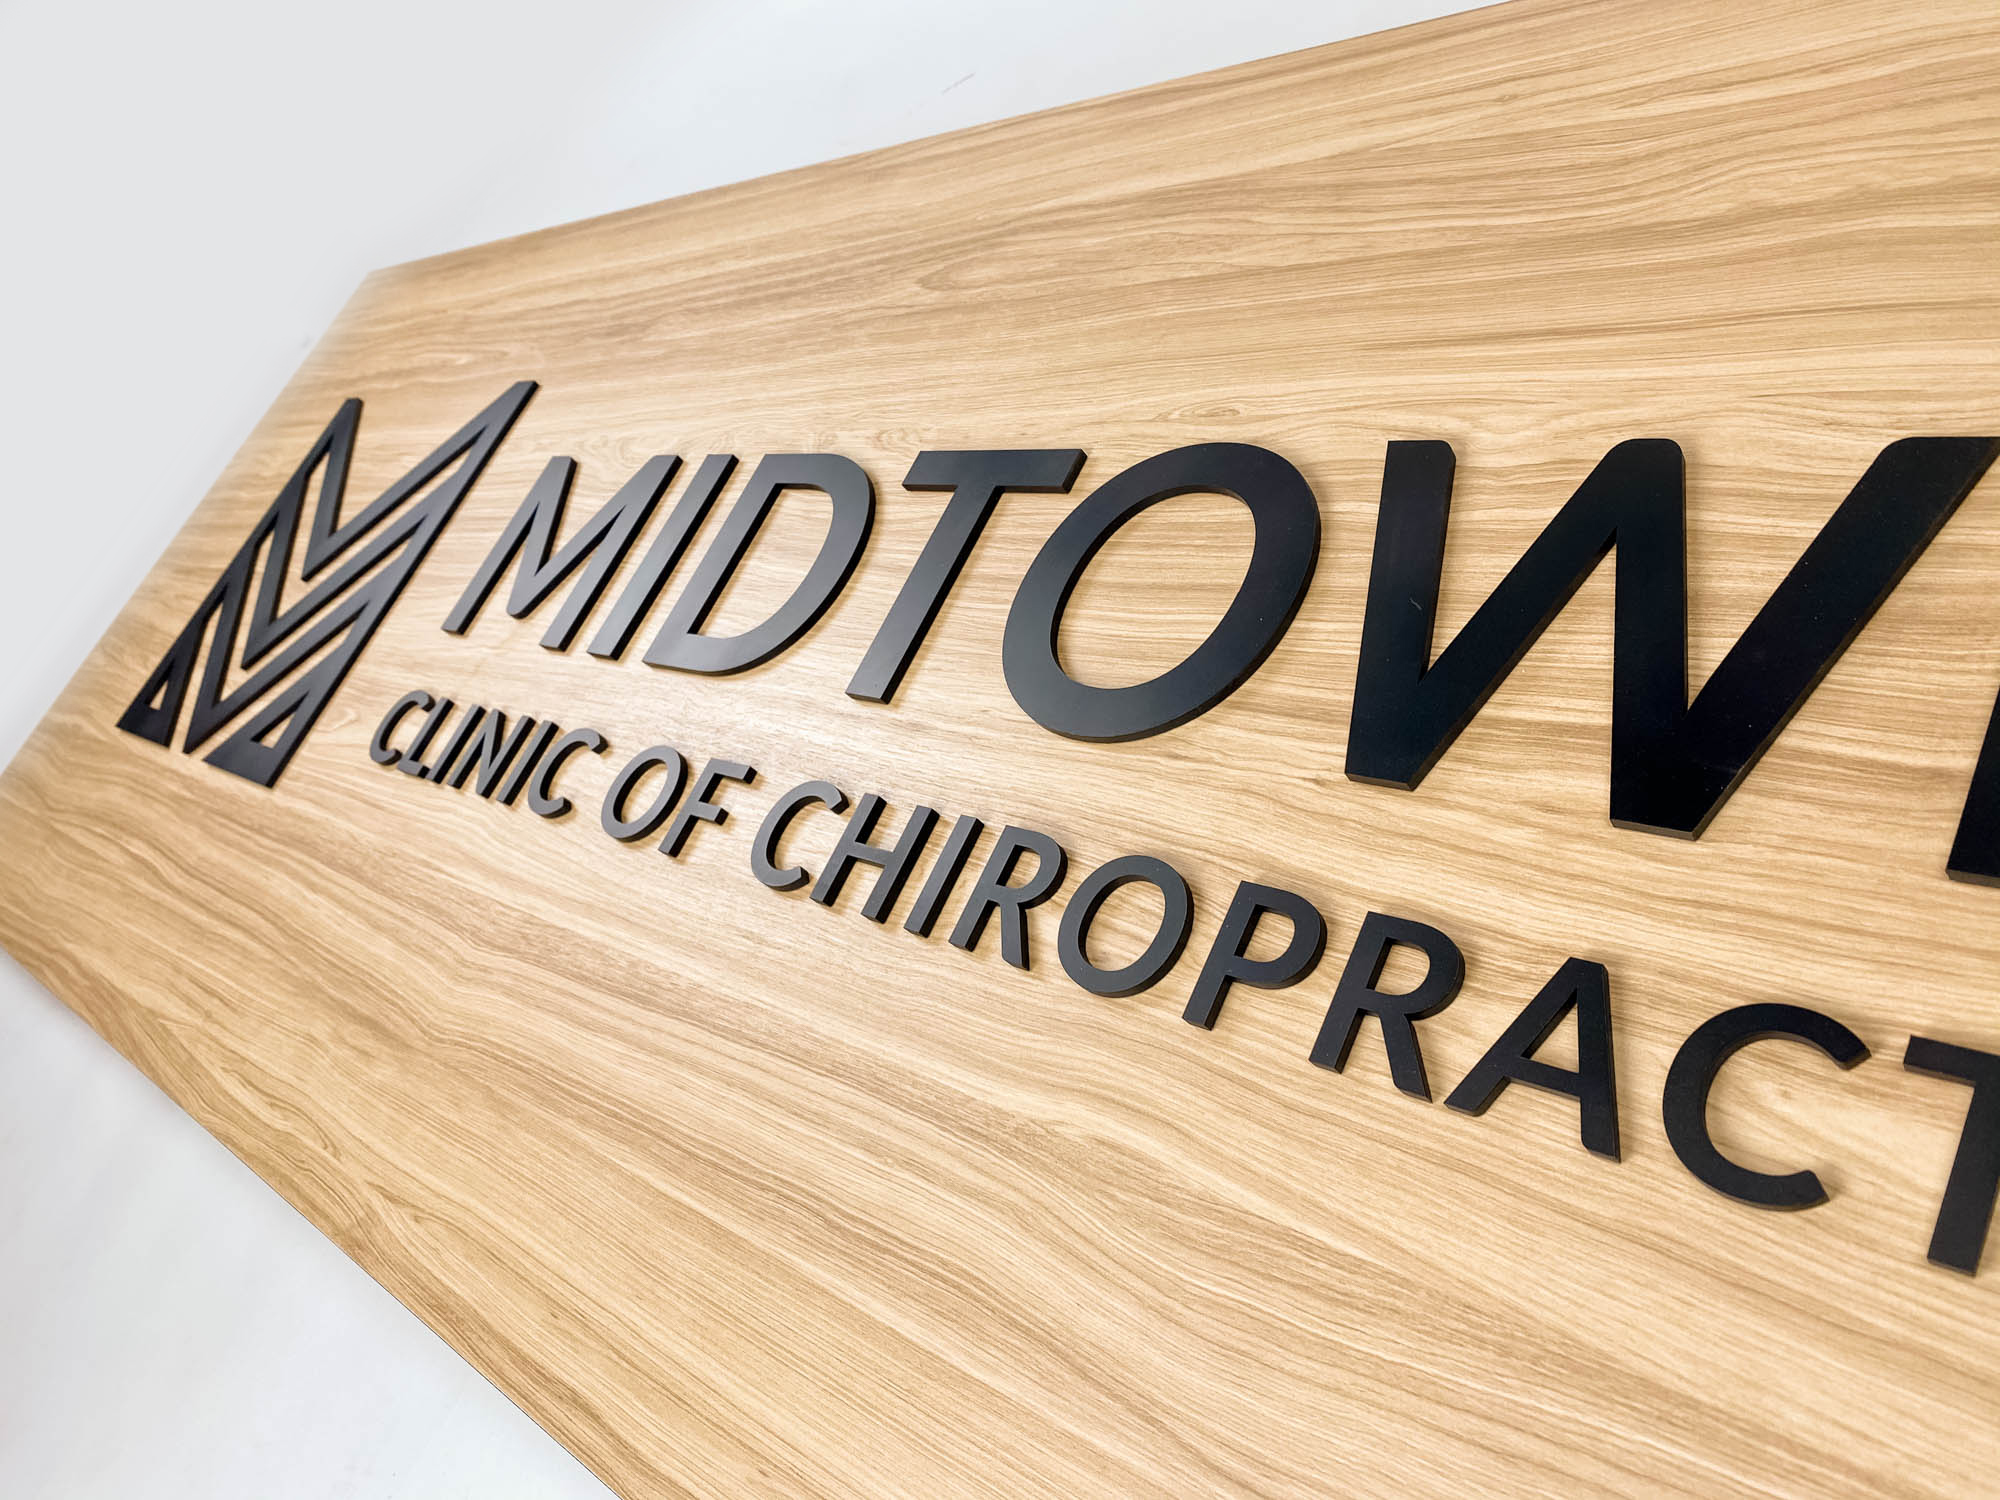 Black logo on light wood laminate panel for the Midtown Clinic of Chiropractic, a full-service chiropractic treatment center serving the Lake Worth, FL area.